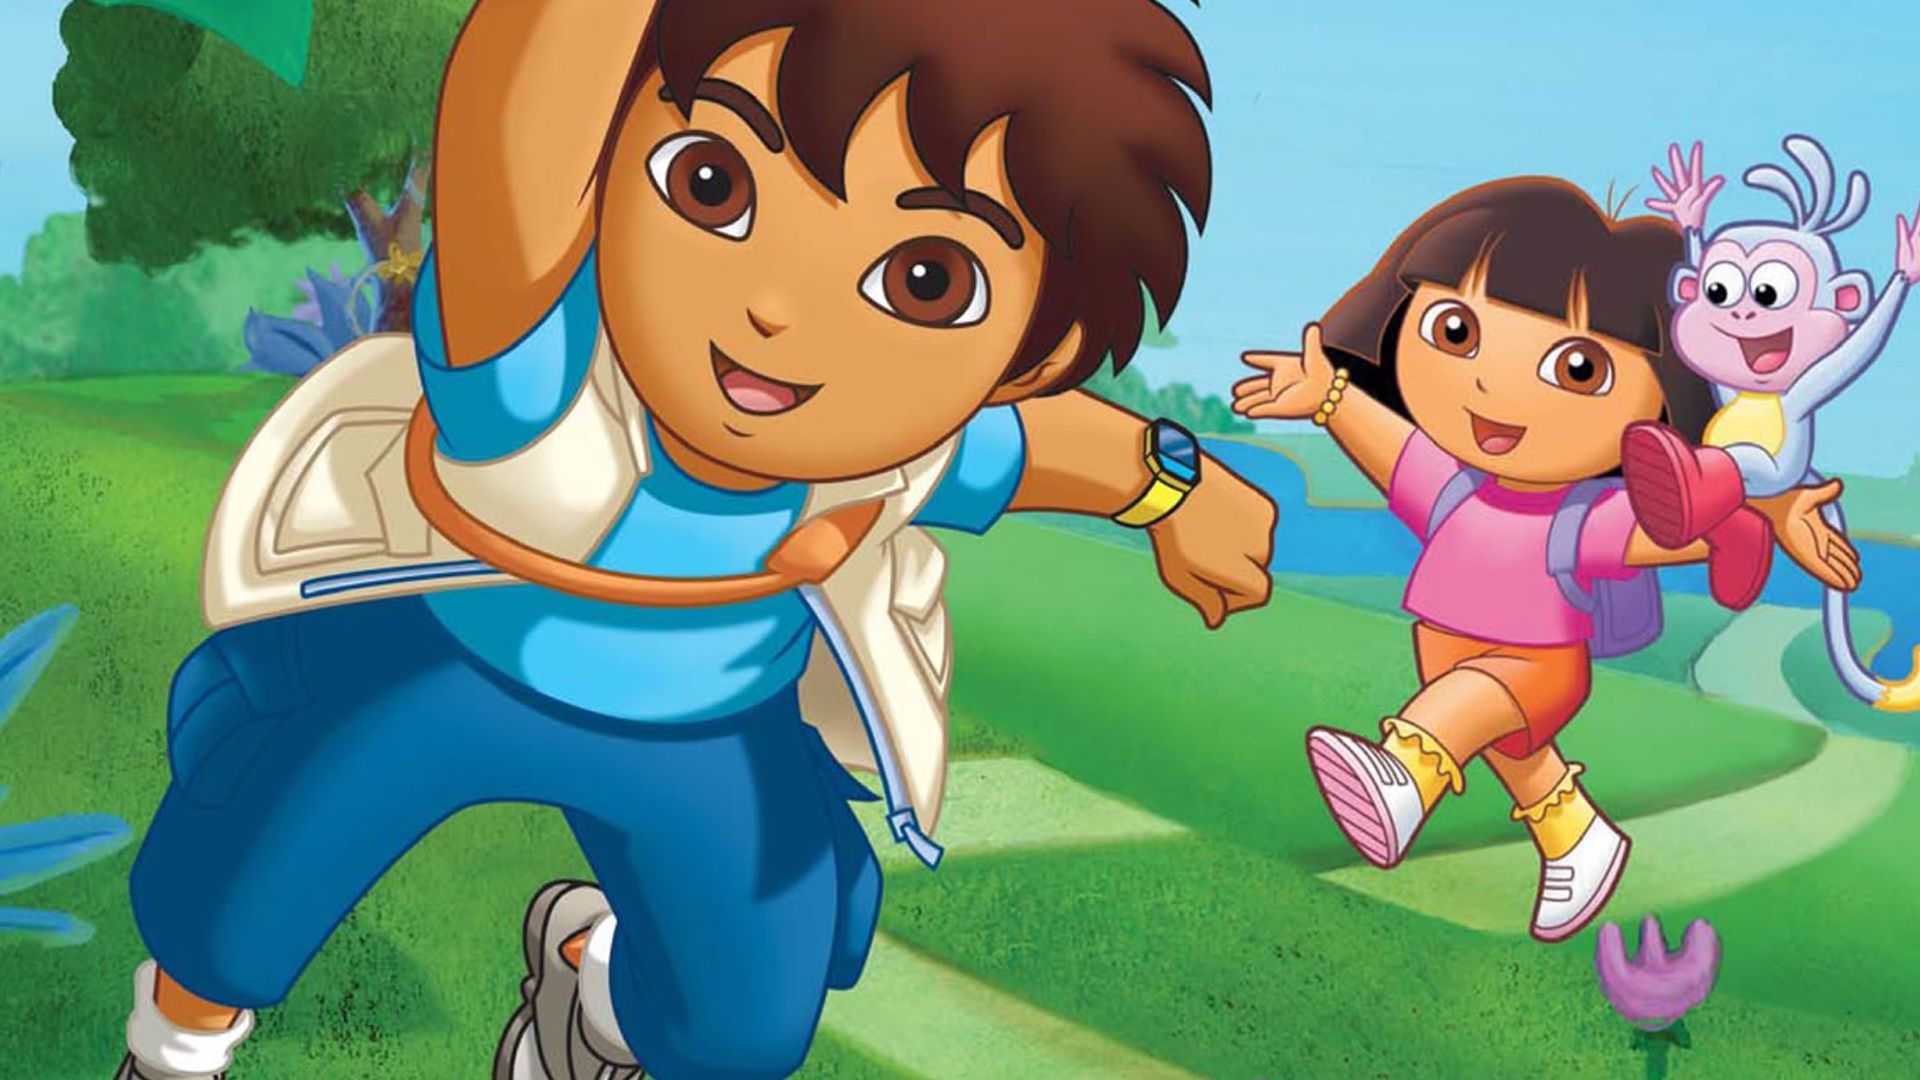 Dora The Explorer Characters - Best Wallpapers of Dora and Boots - Mega The...